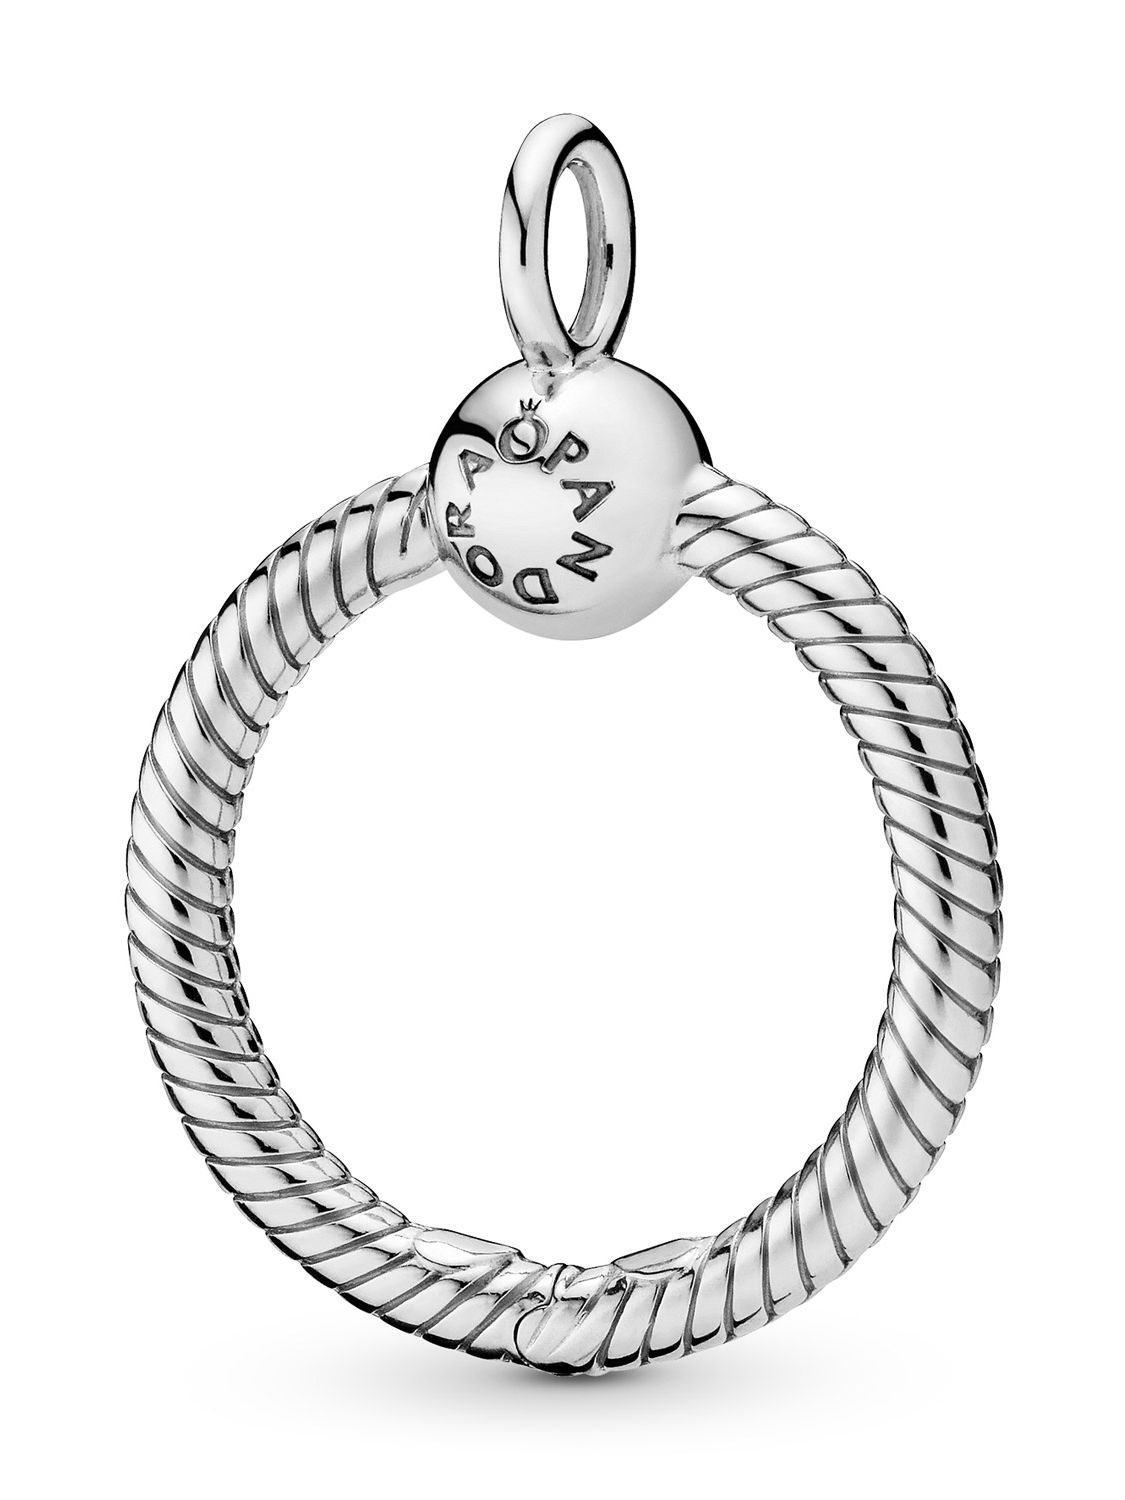 Pandora 398296 Pendant Moments O 25 Mm With Latest Pandora Moments Small O Pendant Necklaces (View 1 of 25)